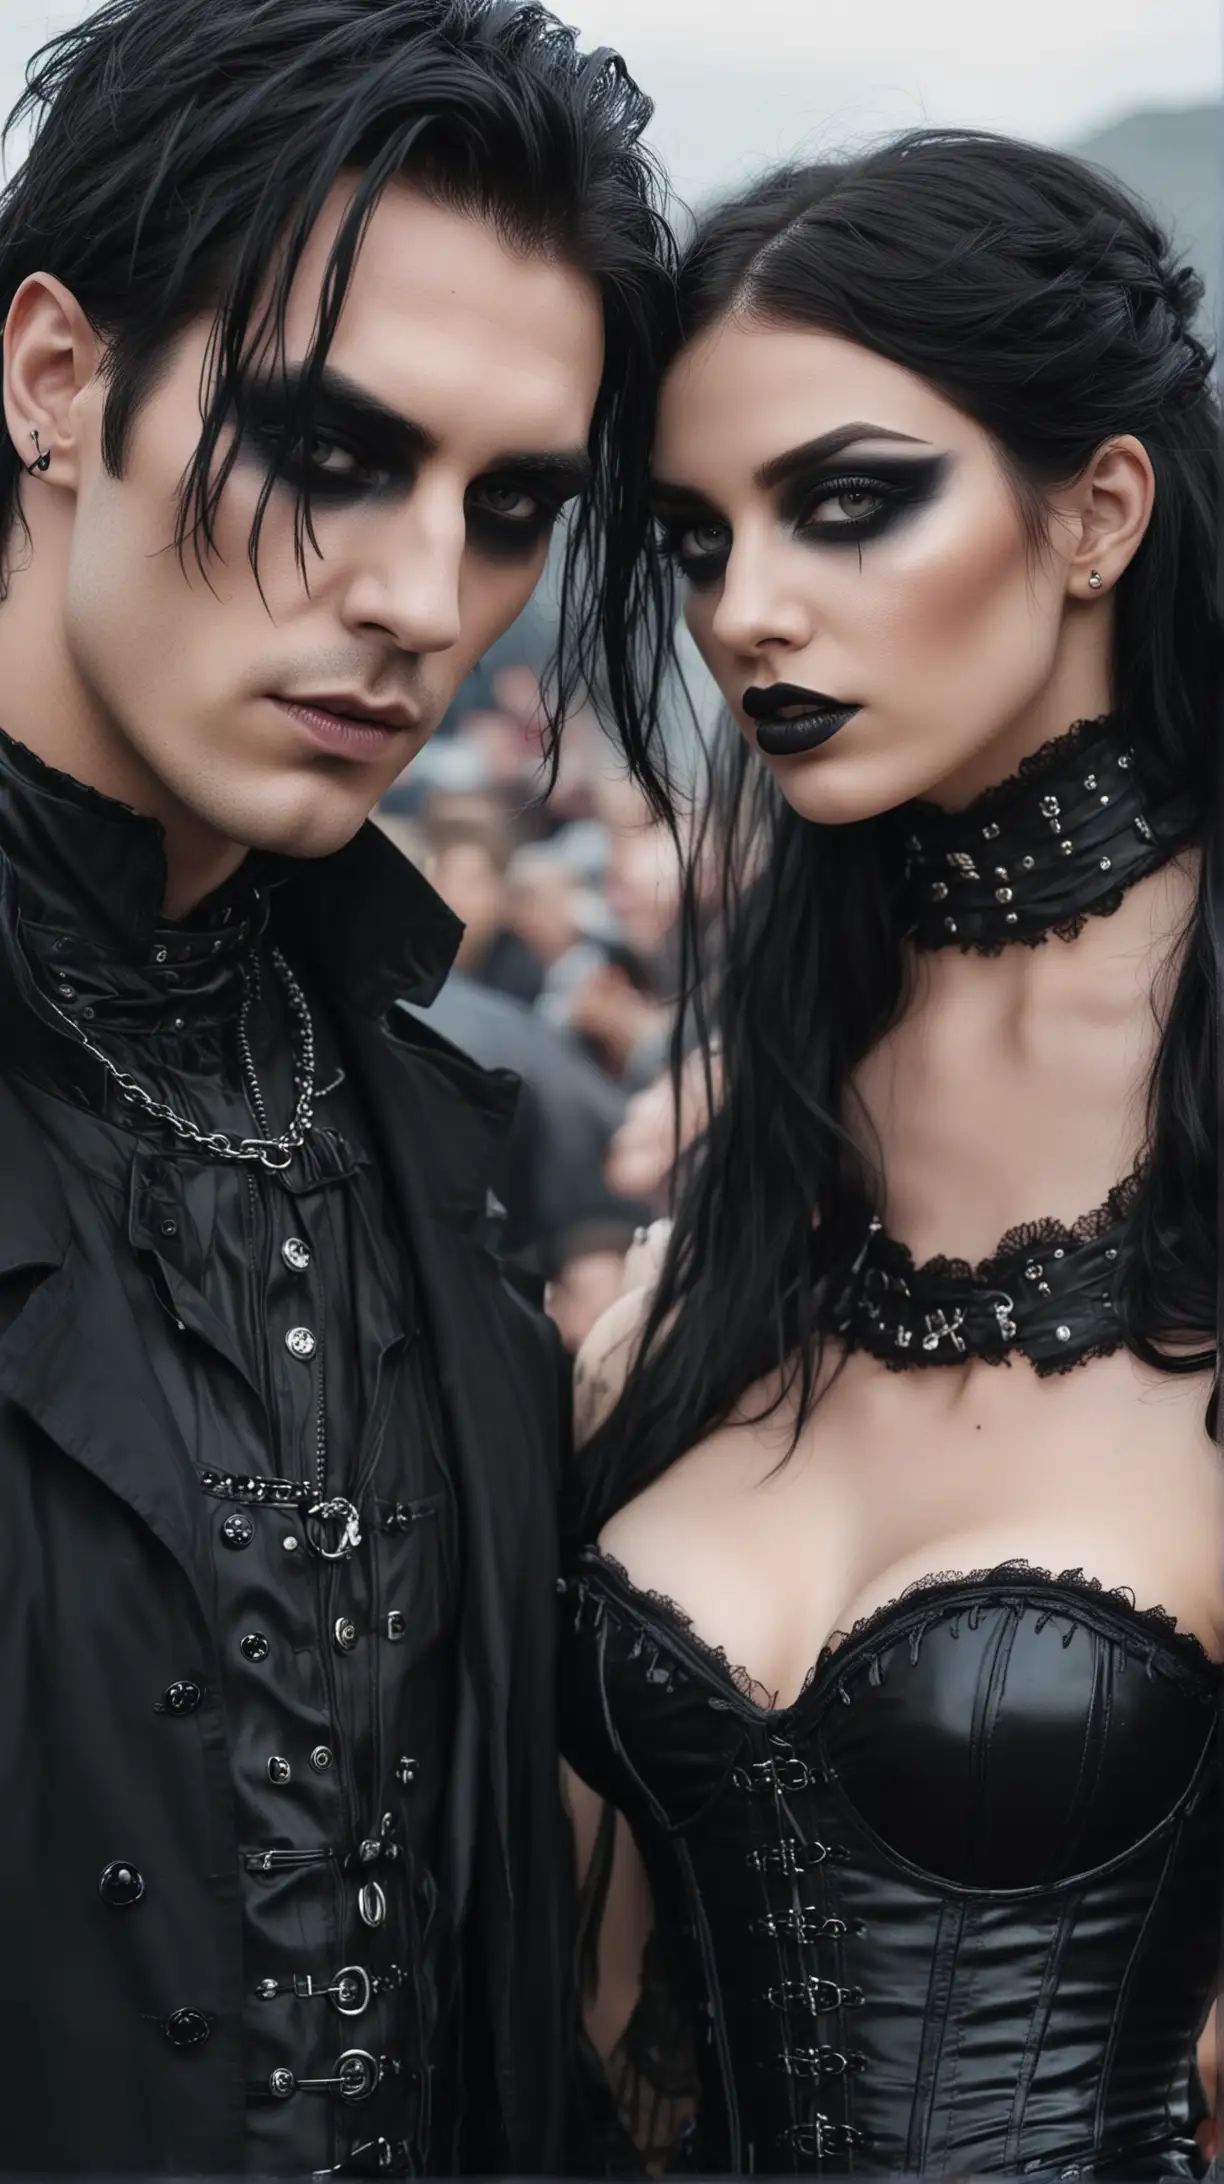 /imagine prompt:gothic man and woman, smokey eye make up, long black nails,  latex corset, they are at a rock festival, vampire ispired look.